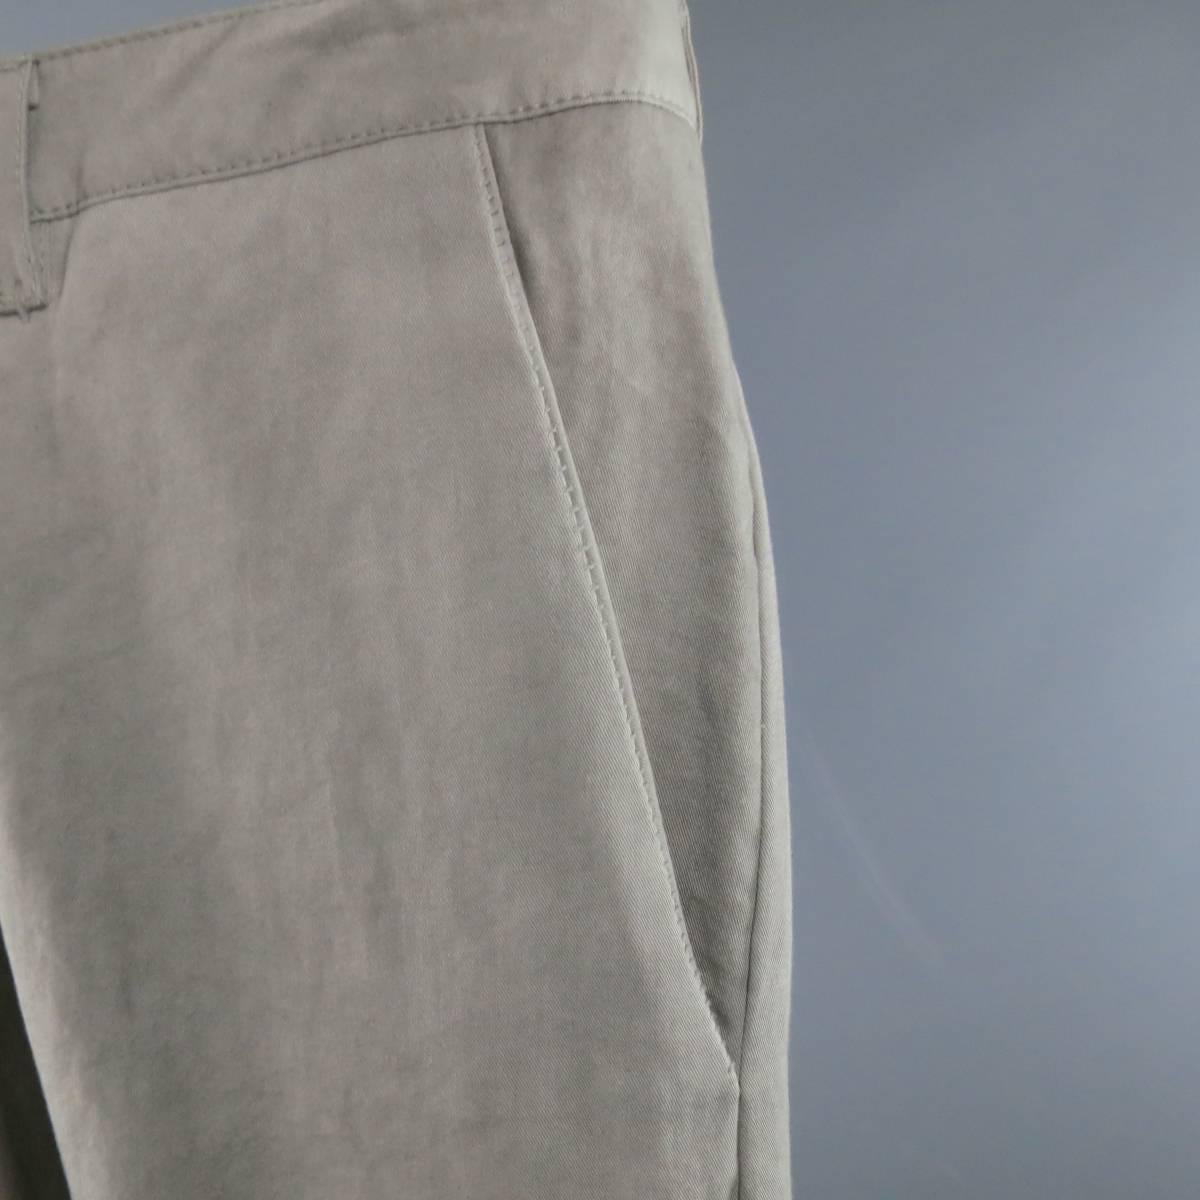 POEME BOHEMIEN pants in a light gray wash dyed cotton twill featuring a button fly and straight leg. Made in Italy.
 
Excellent  Pre-Owned Condition.
Marked: 38
 
Measurements:
 
Waist: 38 in.
Rise: 11.5 in.
Inseam: 32 in.